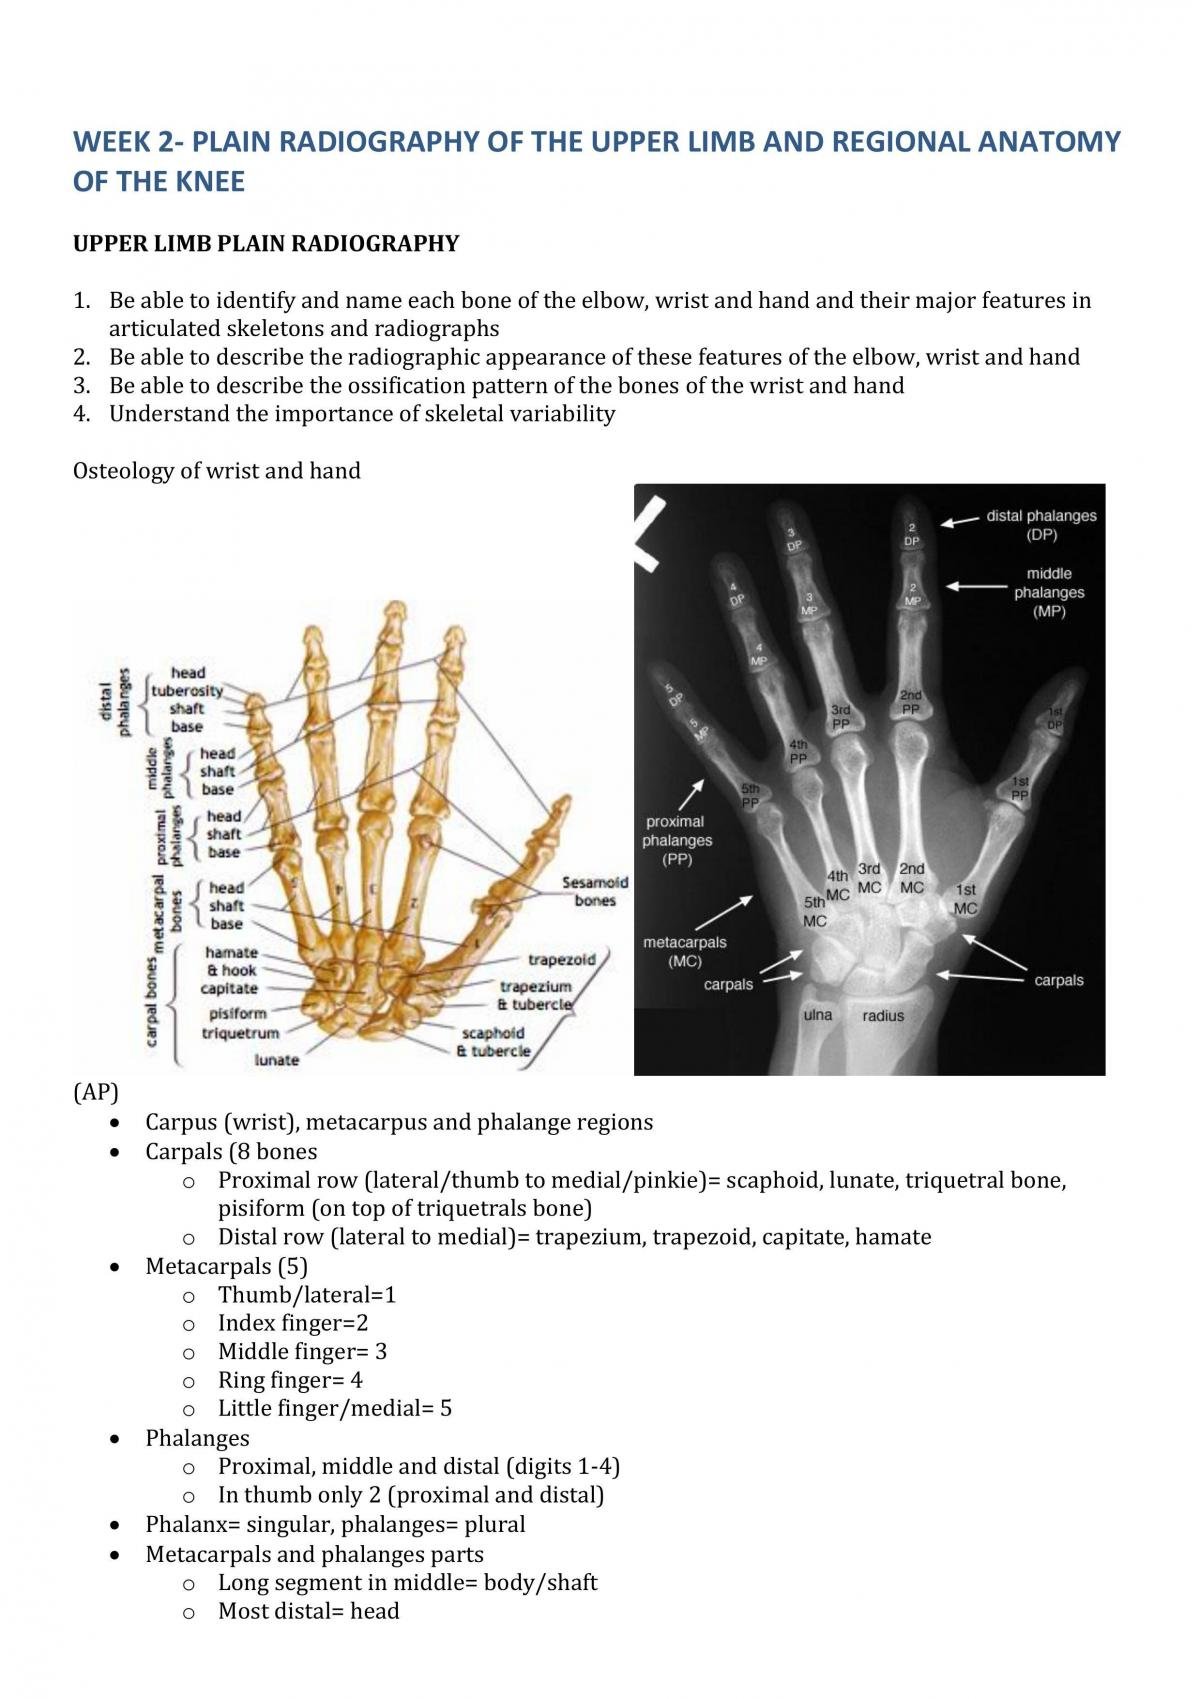 Week 2 Summary Notes - Plain Radiography of the upper limb and regional anatomy of the knee - Page 1